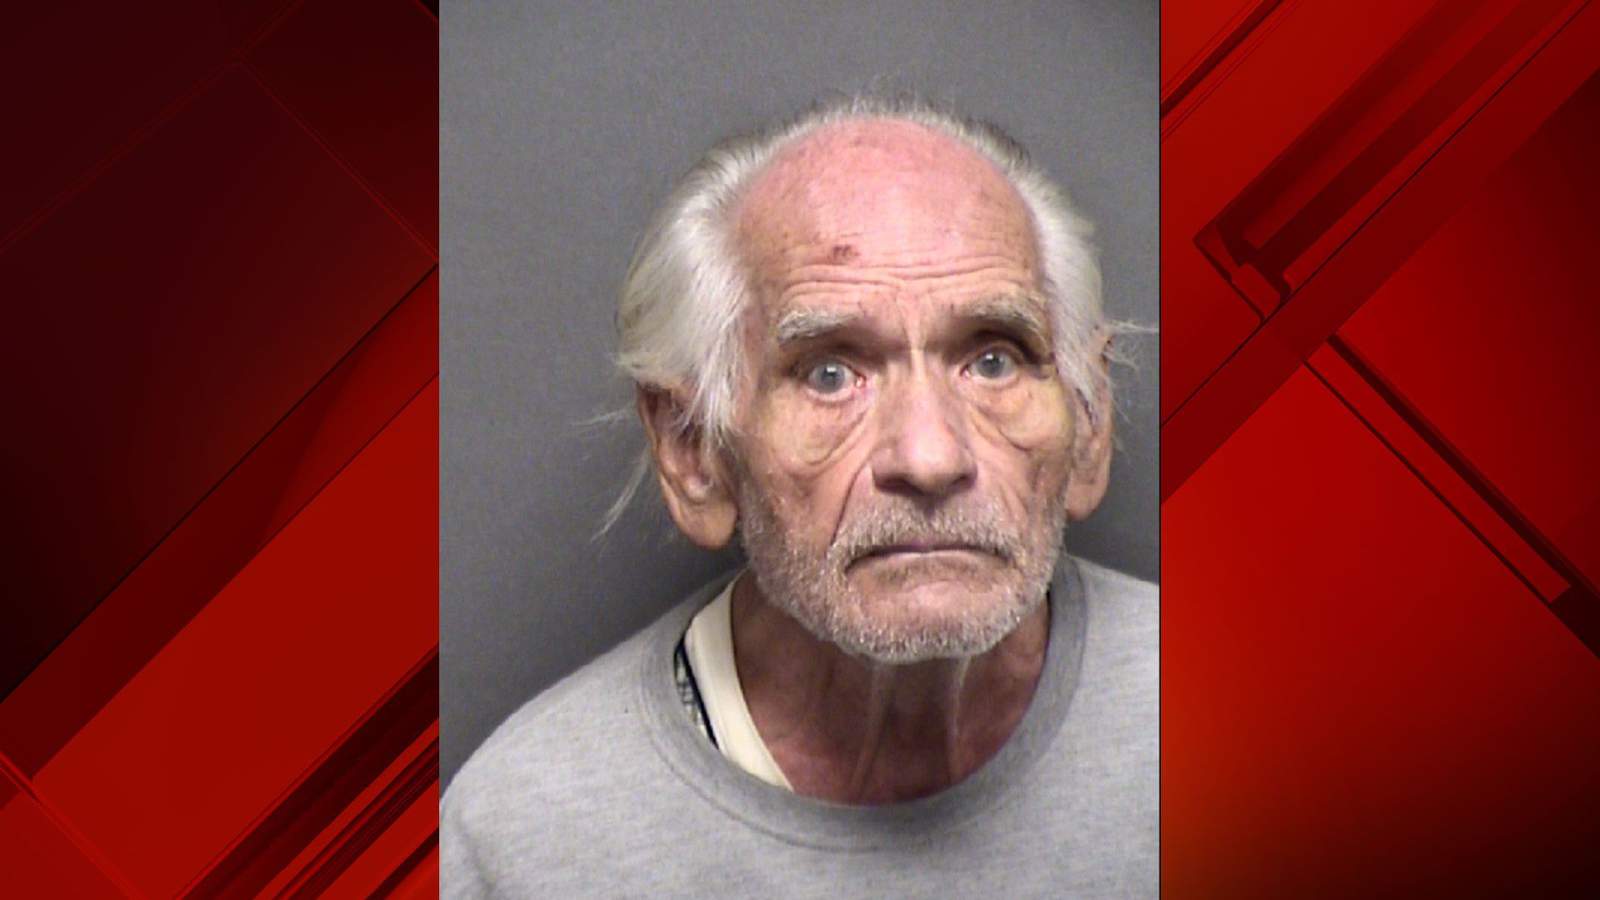 Man, 89, arrested in shooting death of wife in southeast San Antonio home